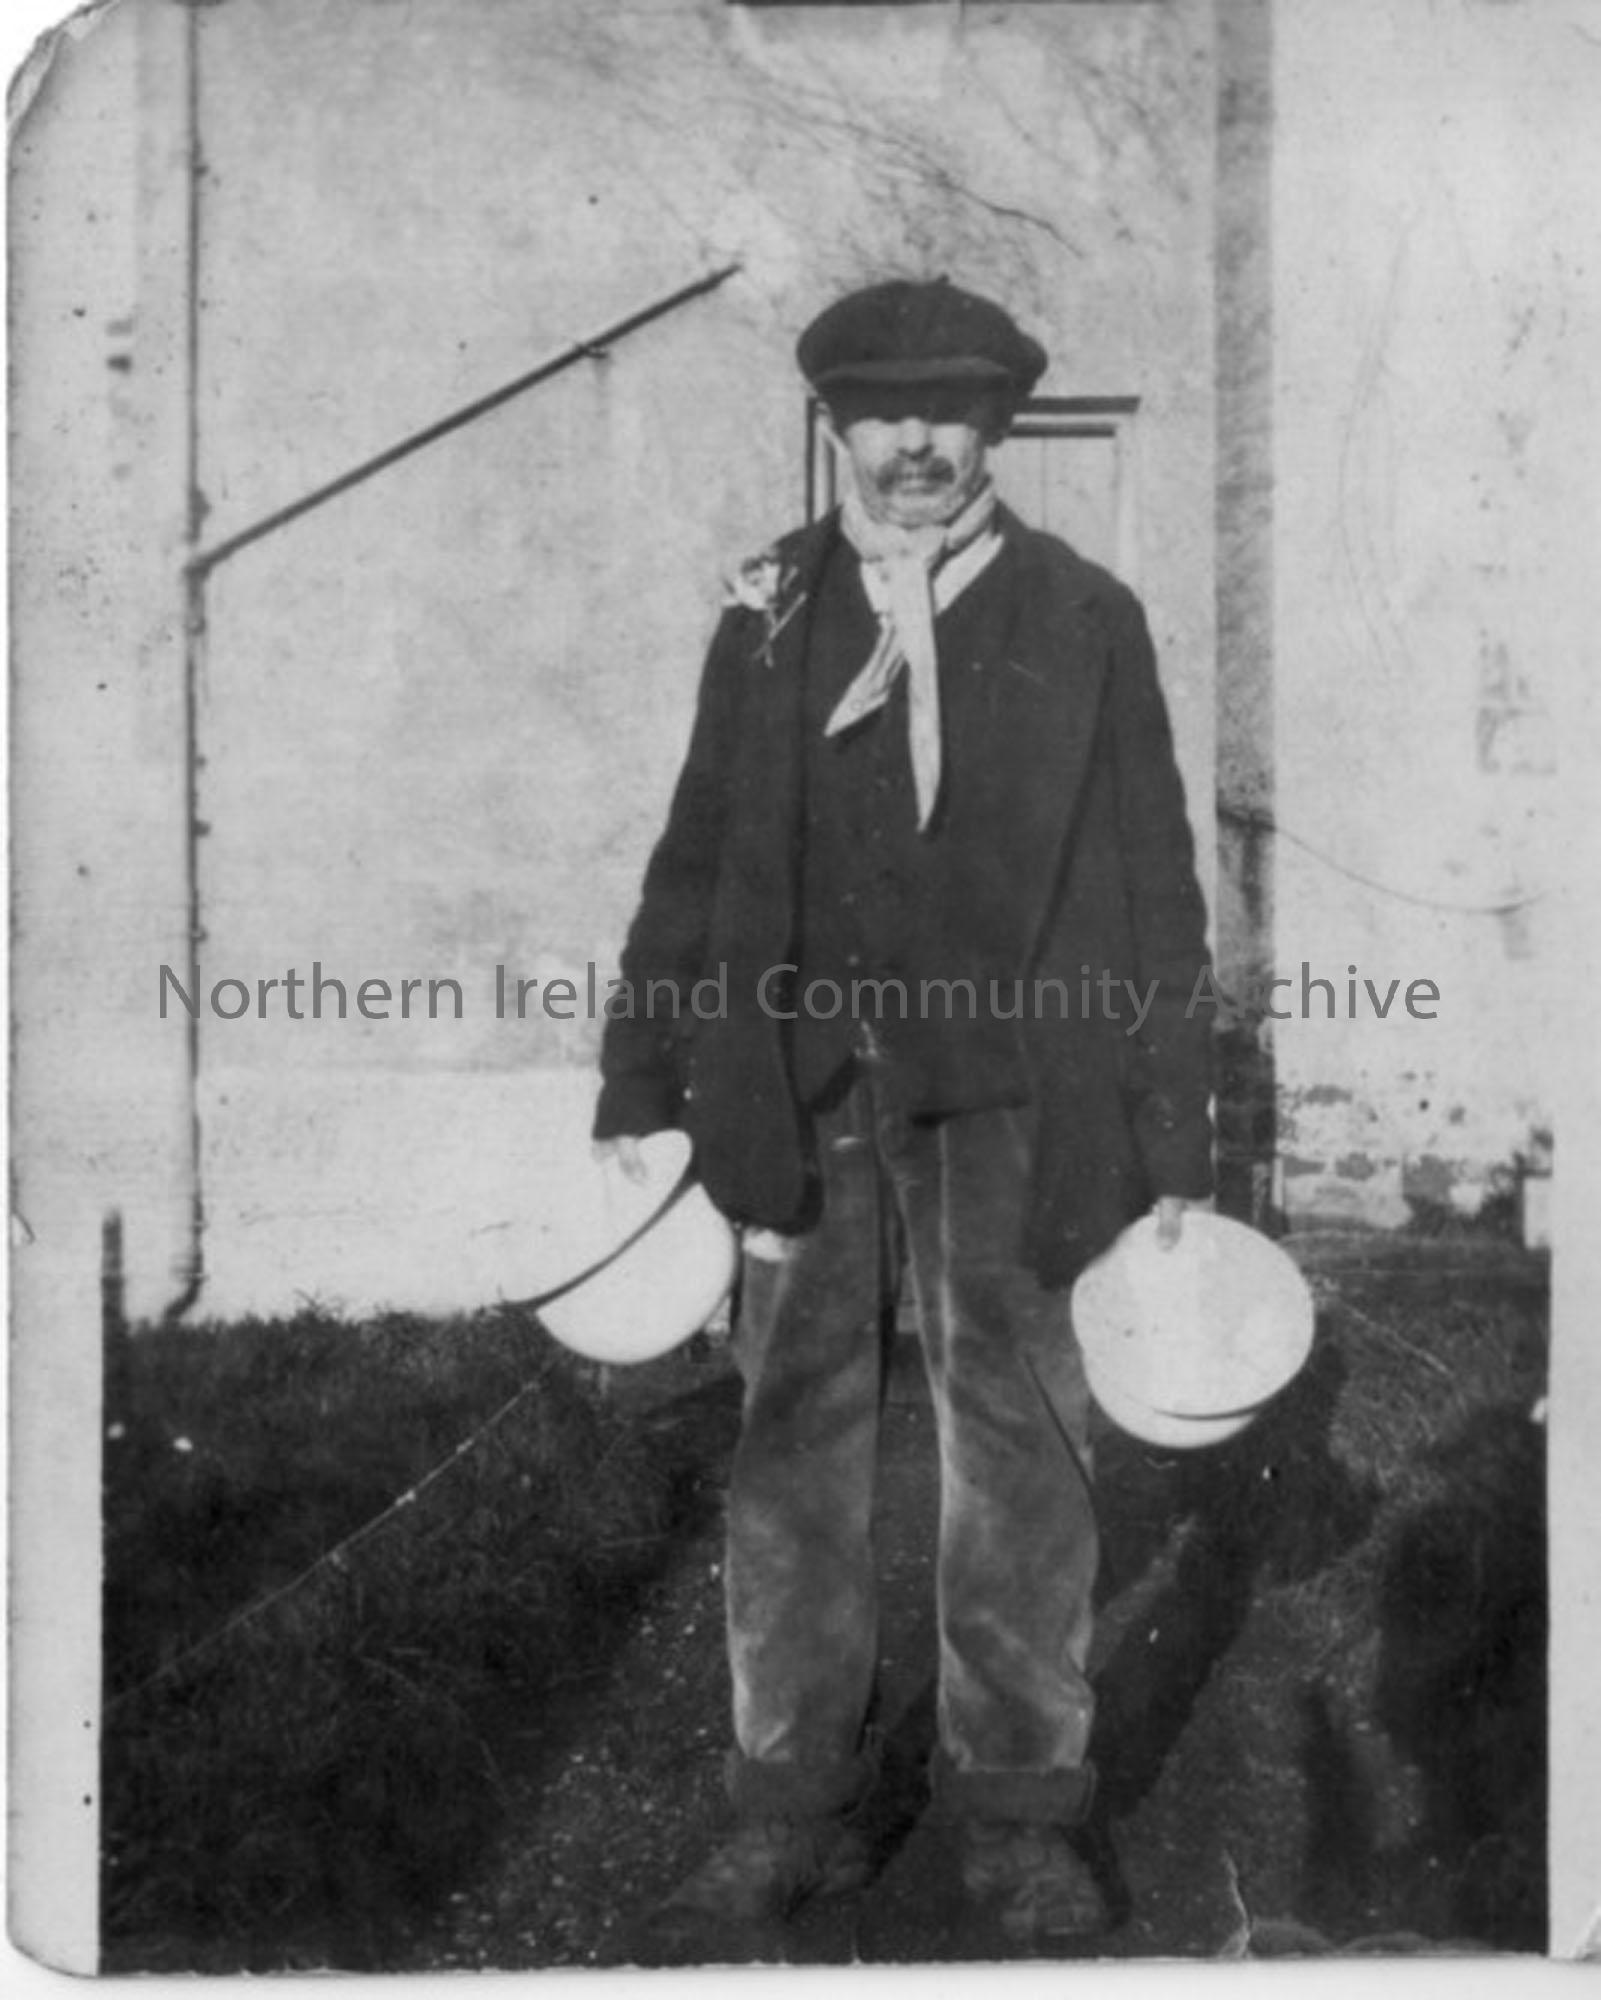 Inmate at the Workhouse in Ballymoney